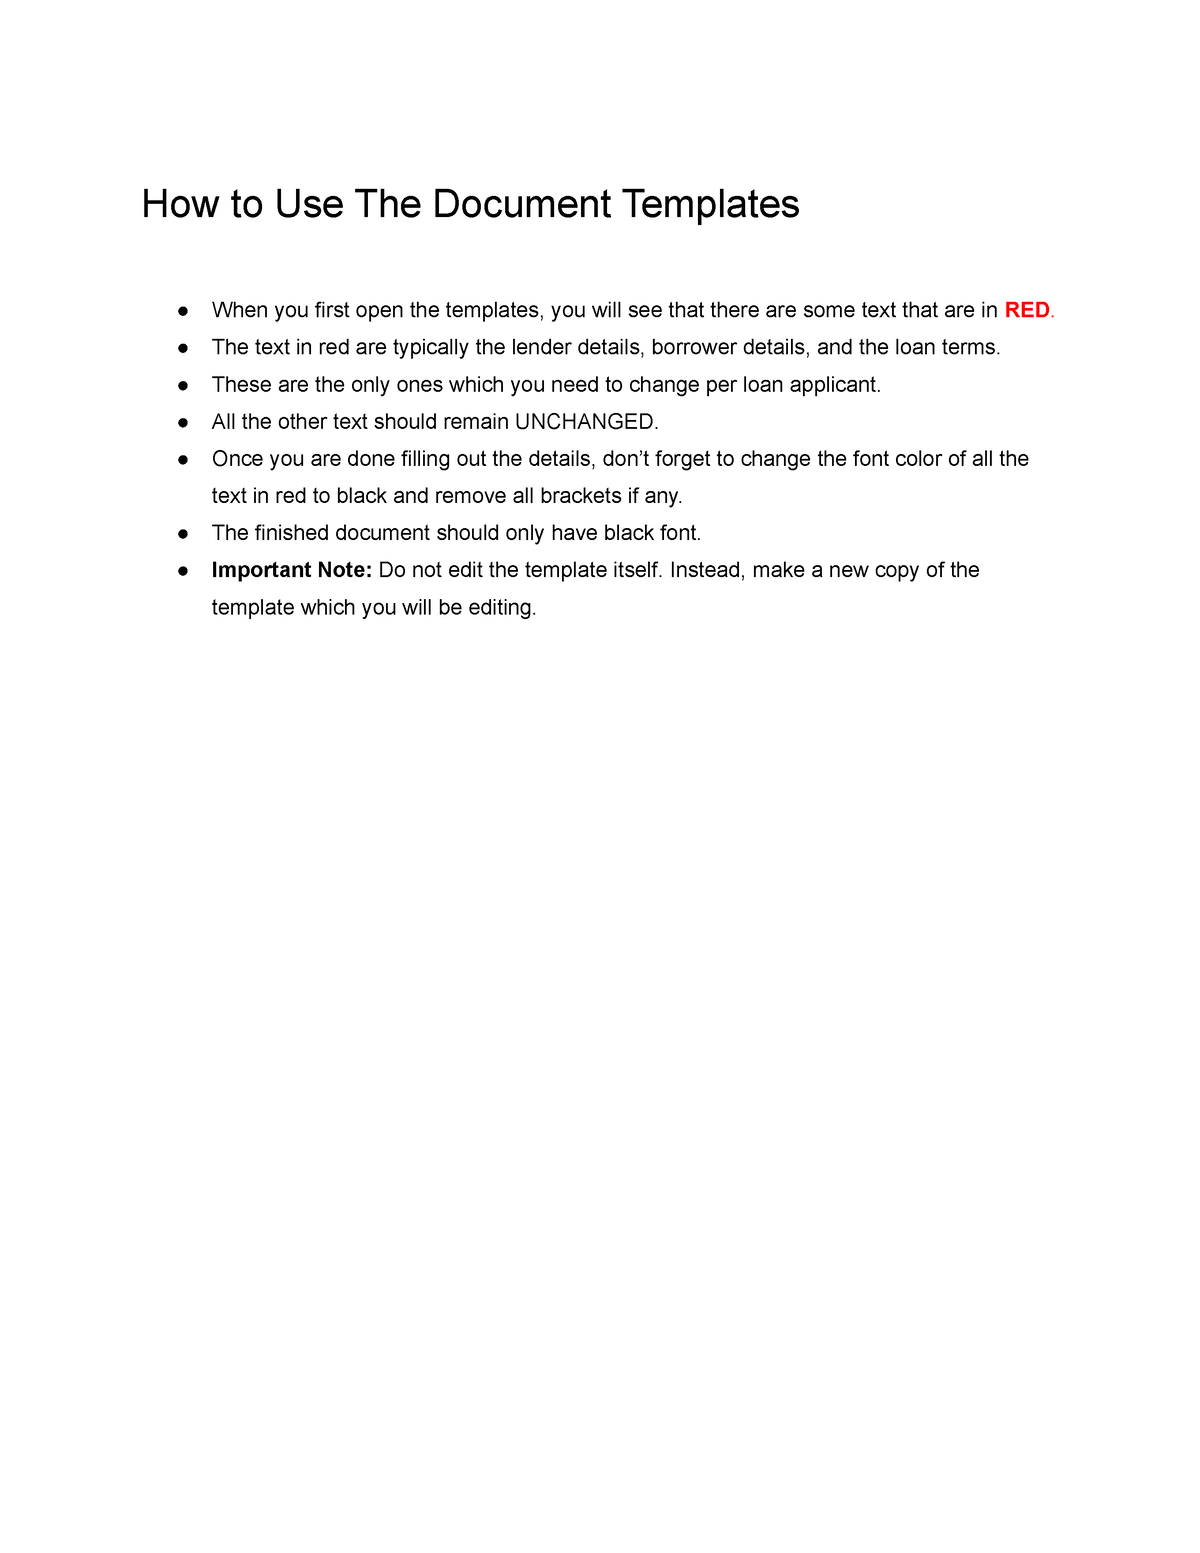 how-to-use-document-templates-read-me-how-to-use-the-document